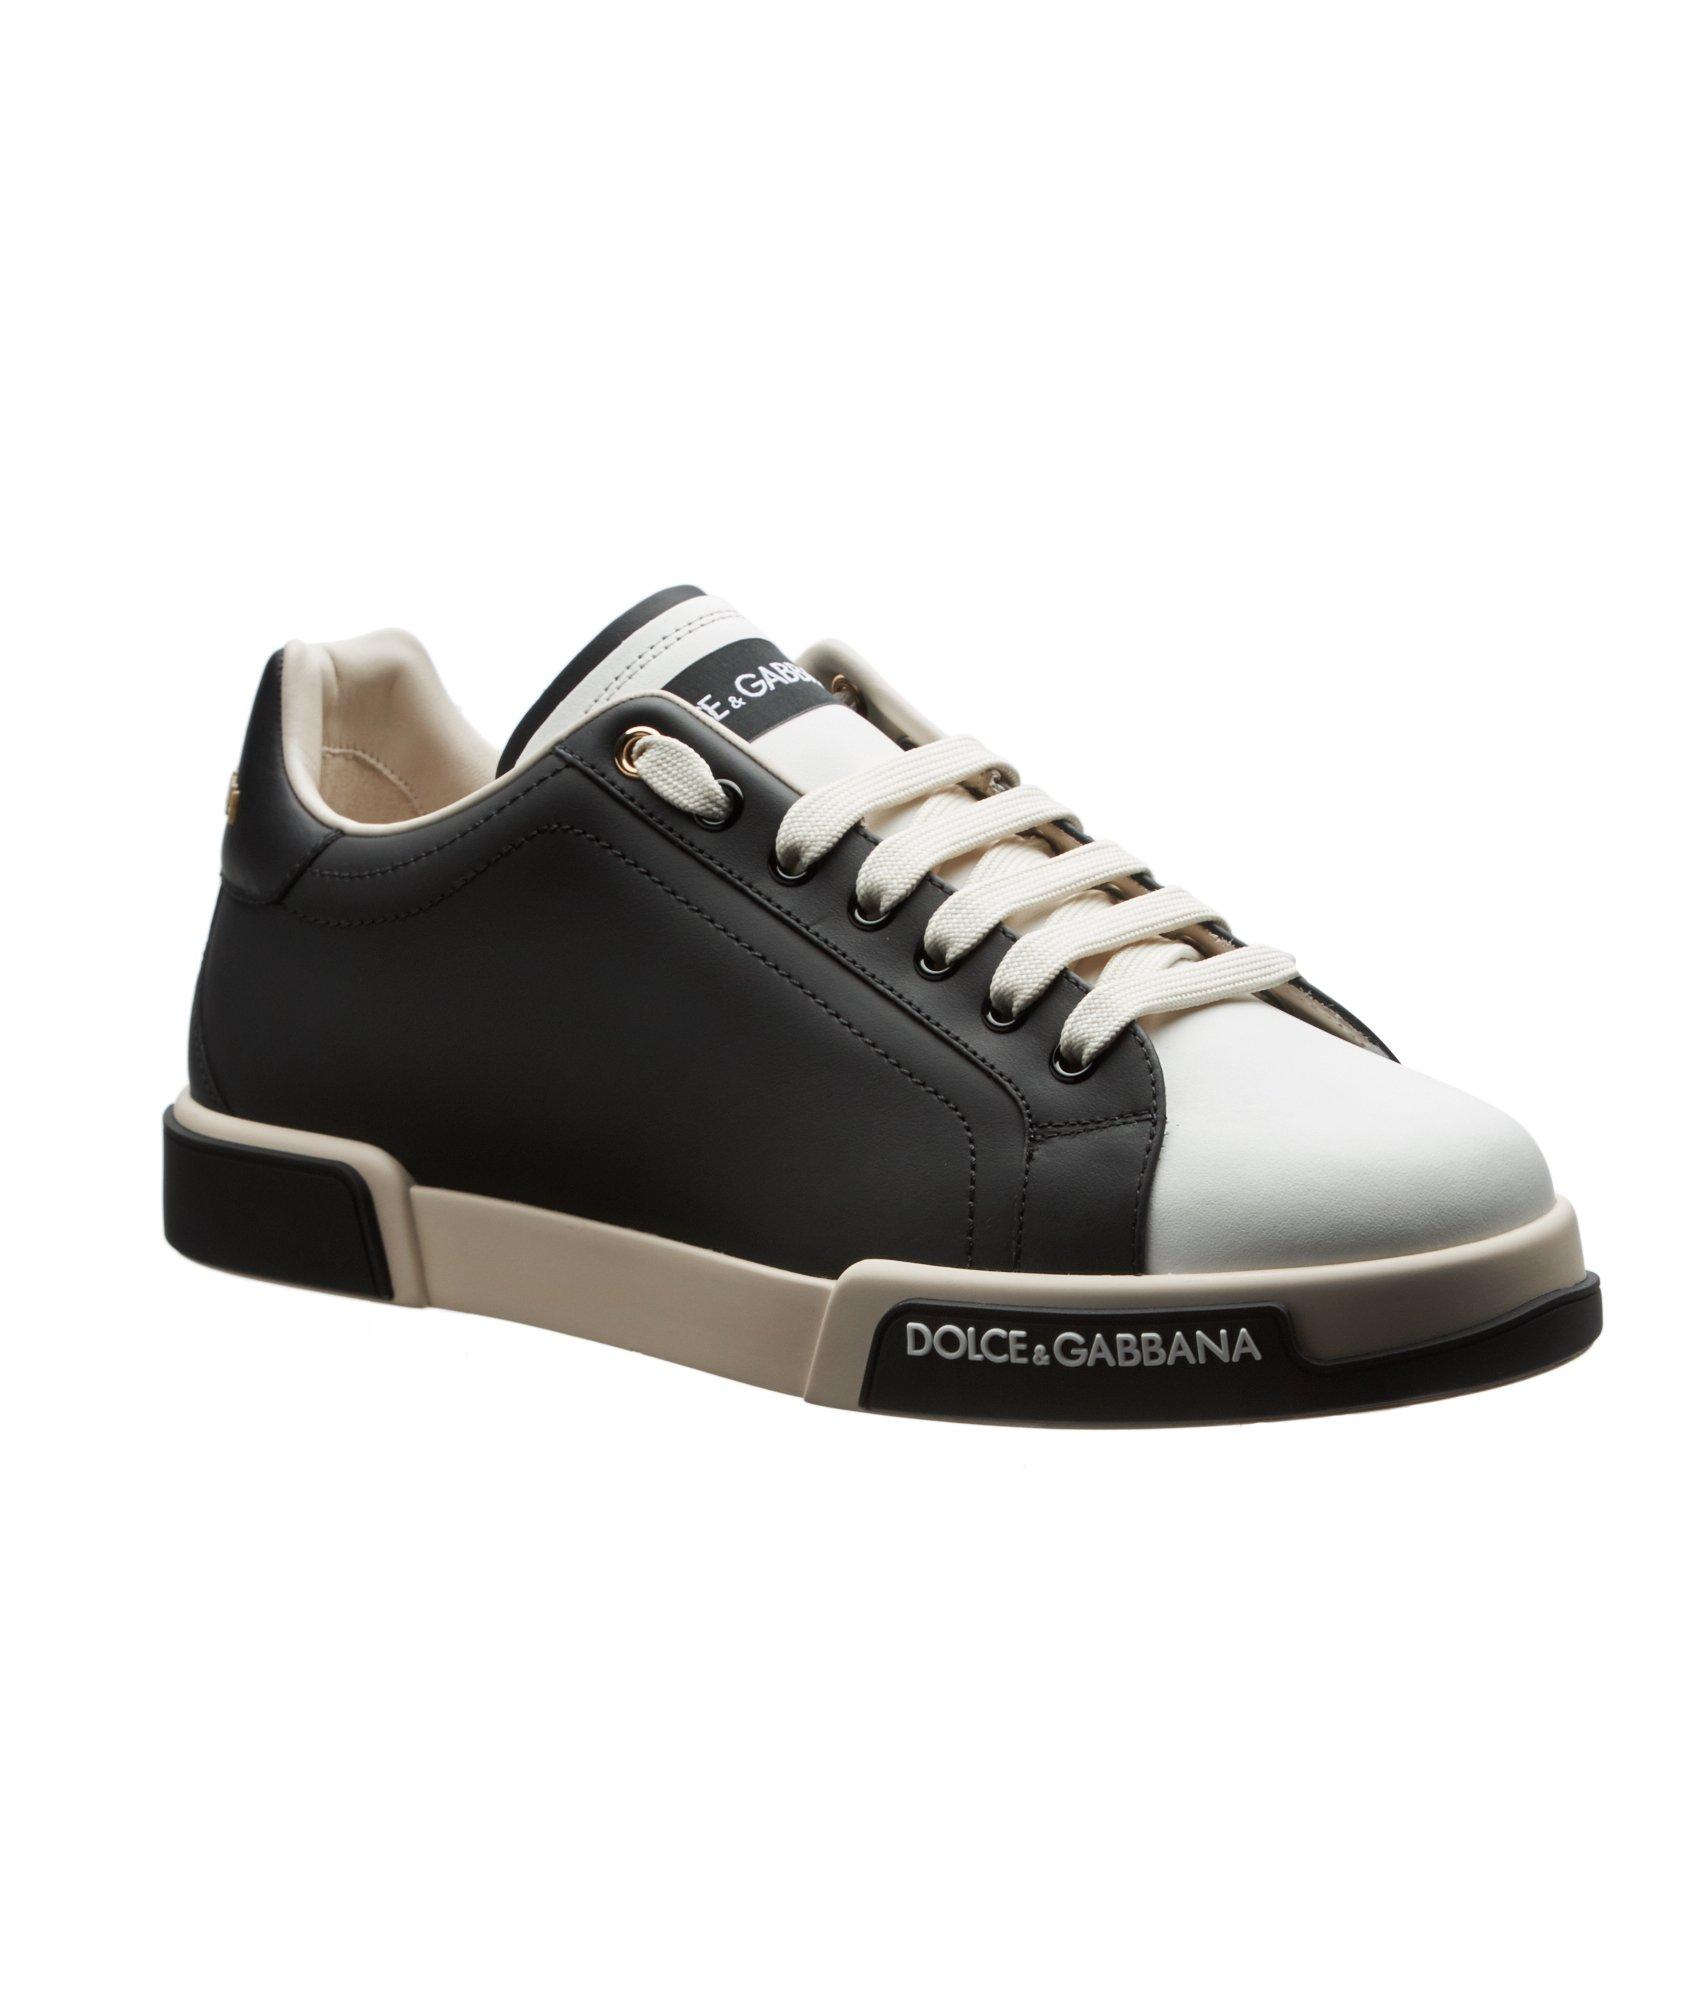 Colour-Blocked Leather Sneakers image 0